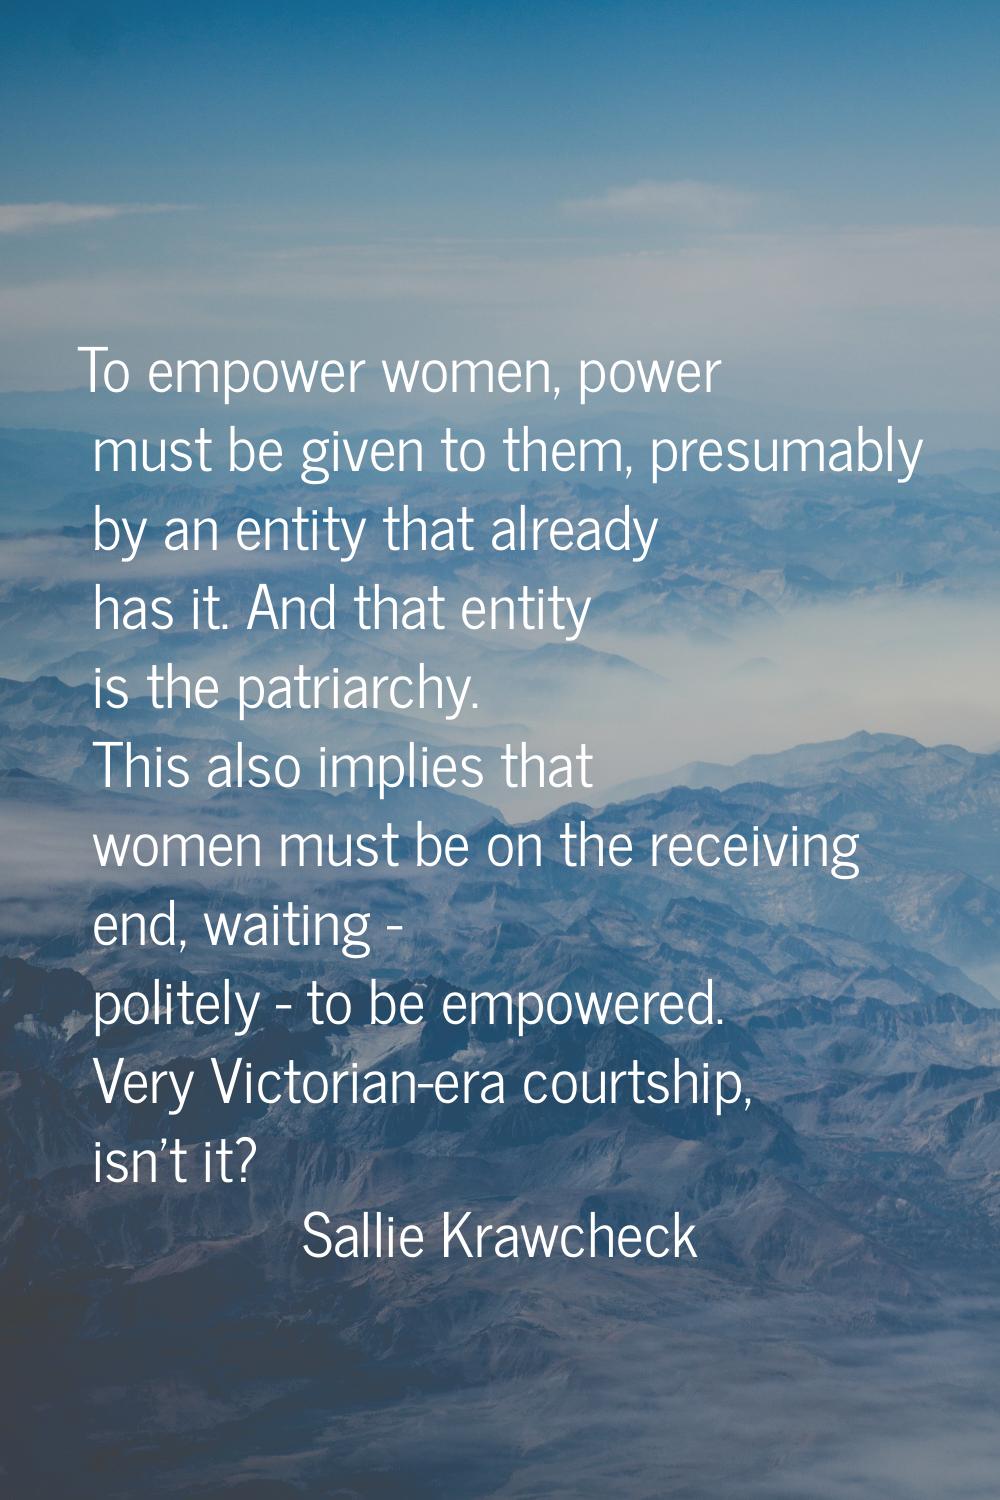 To empower women, power must be given to them, presumably by an entity that already has it. And tha